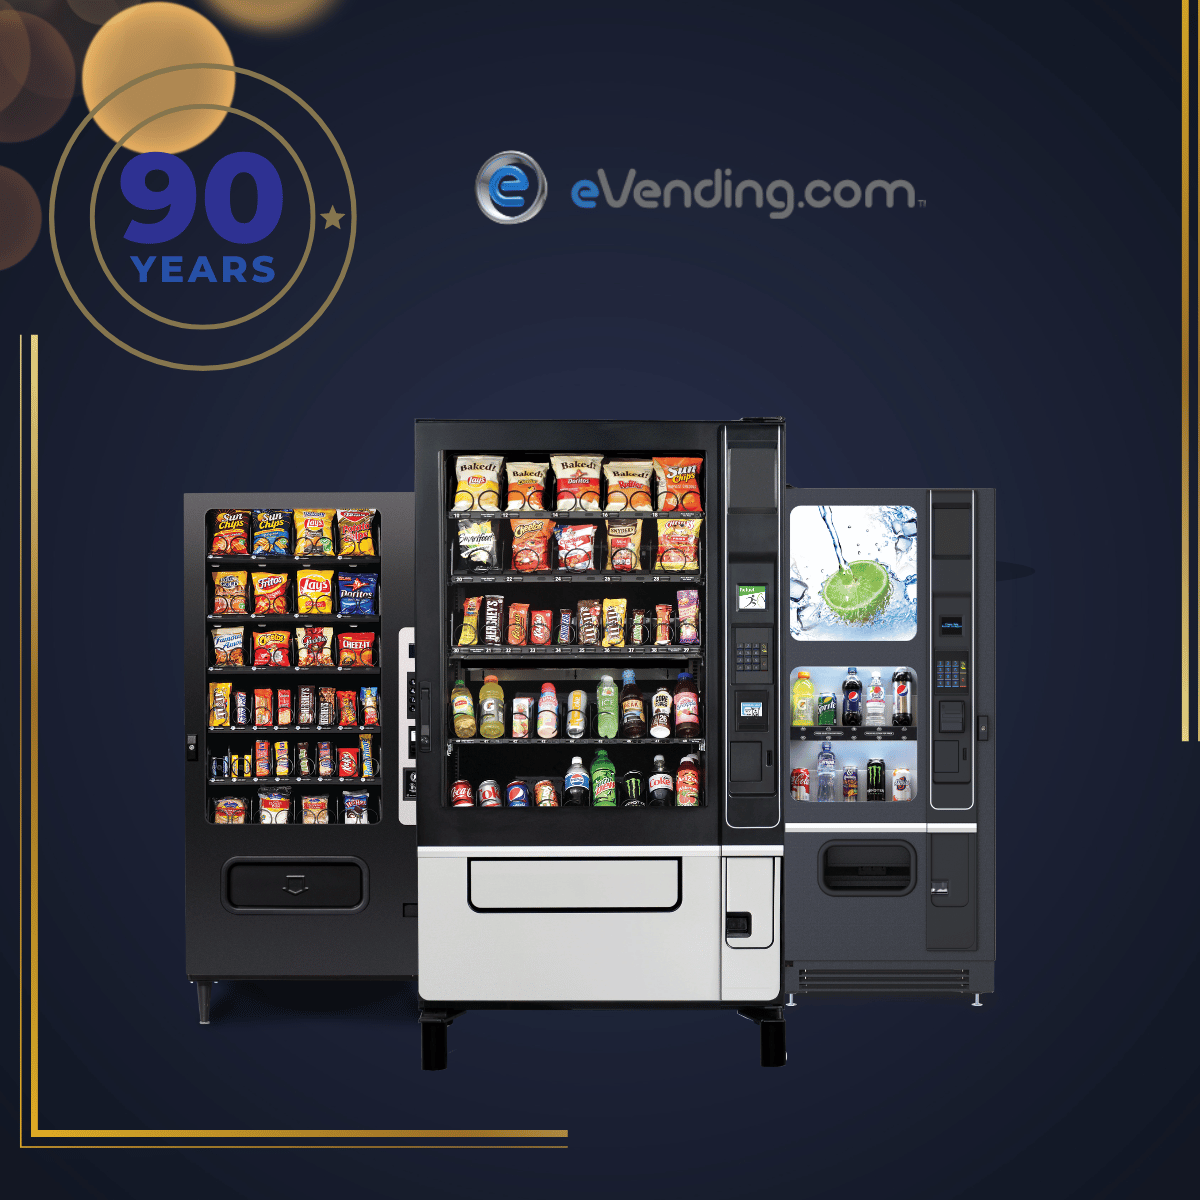 90 YEARS OF VENDING EXPERIENCE